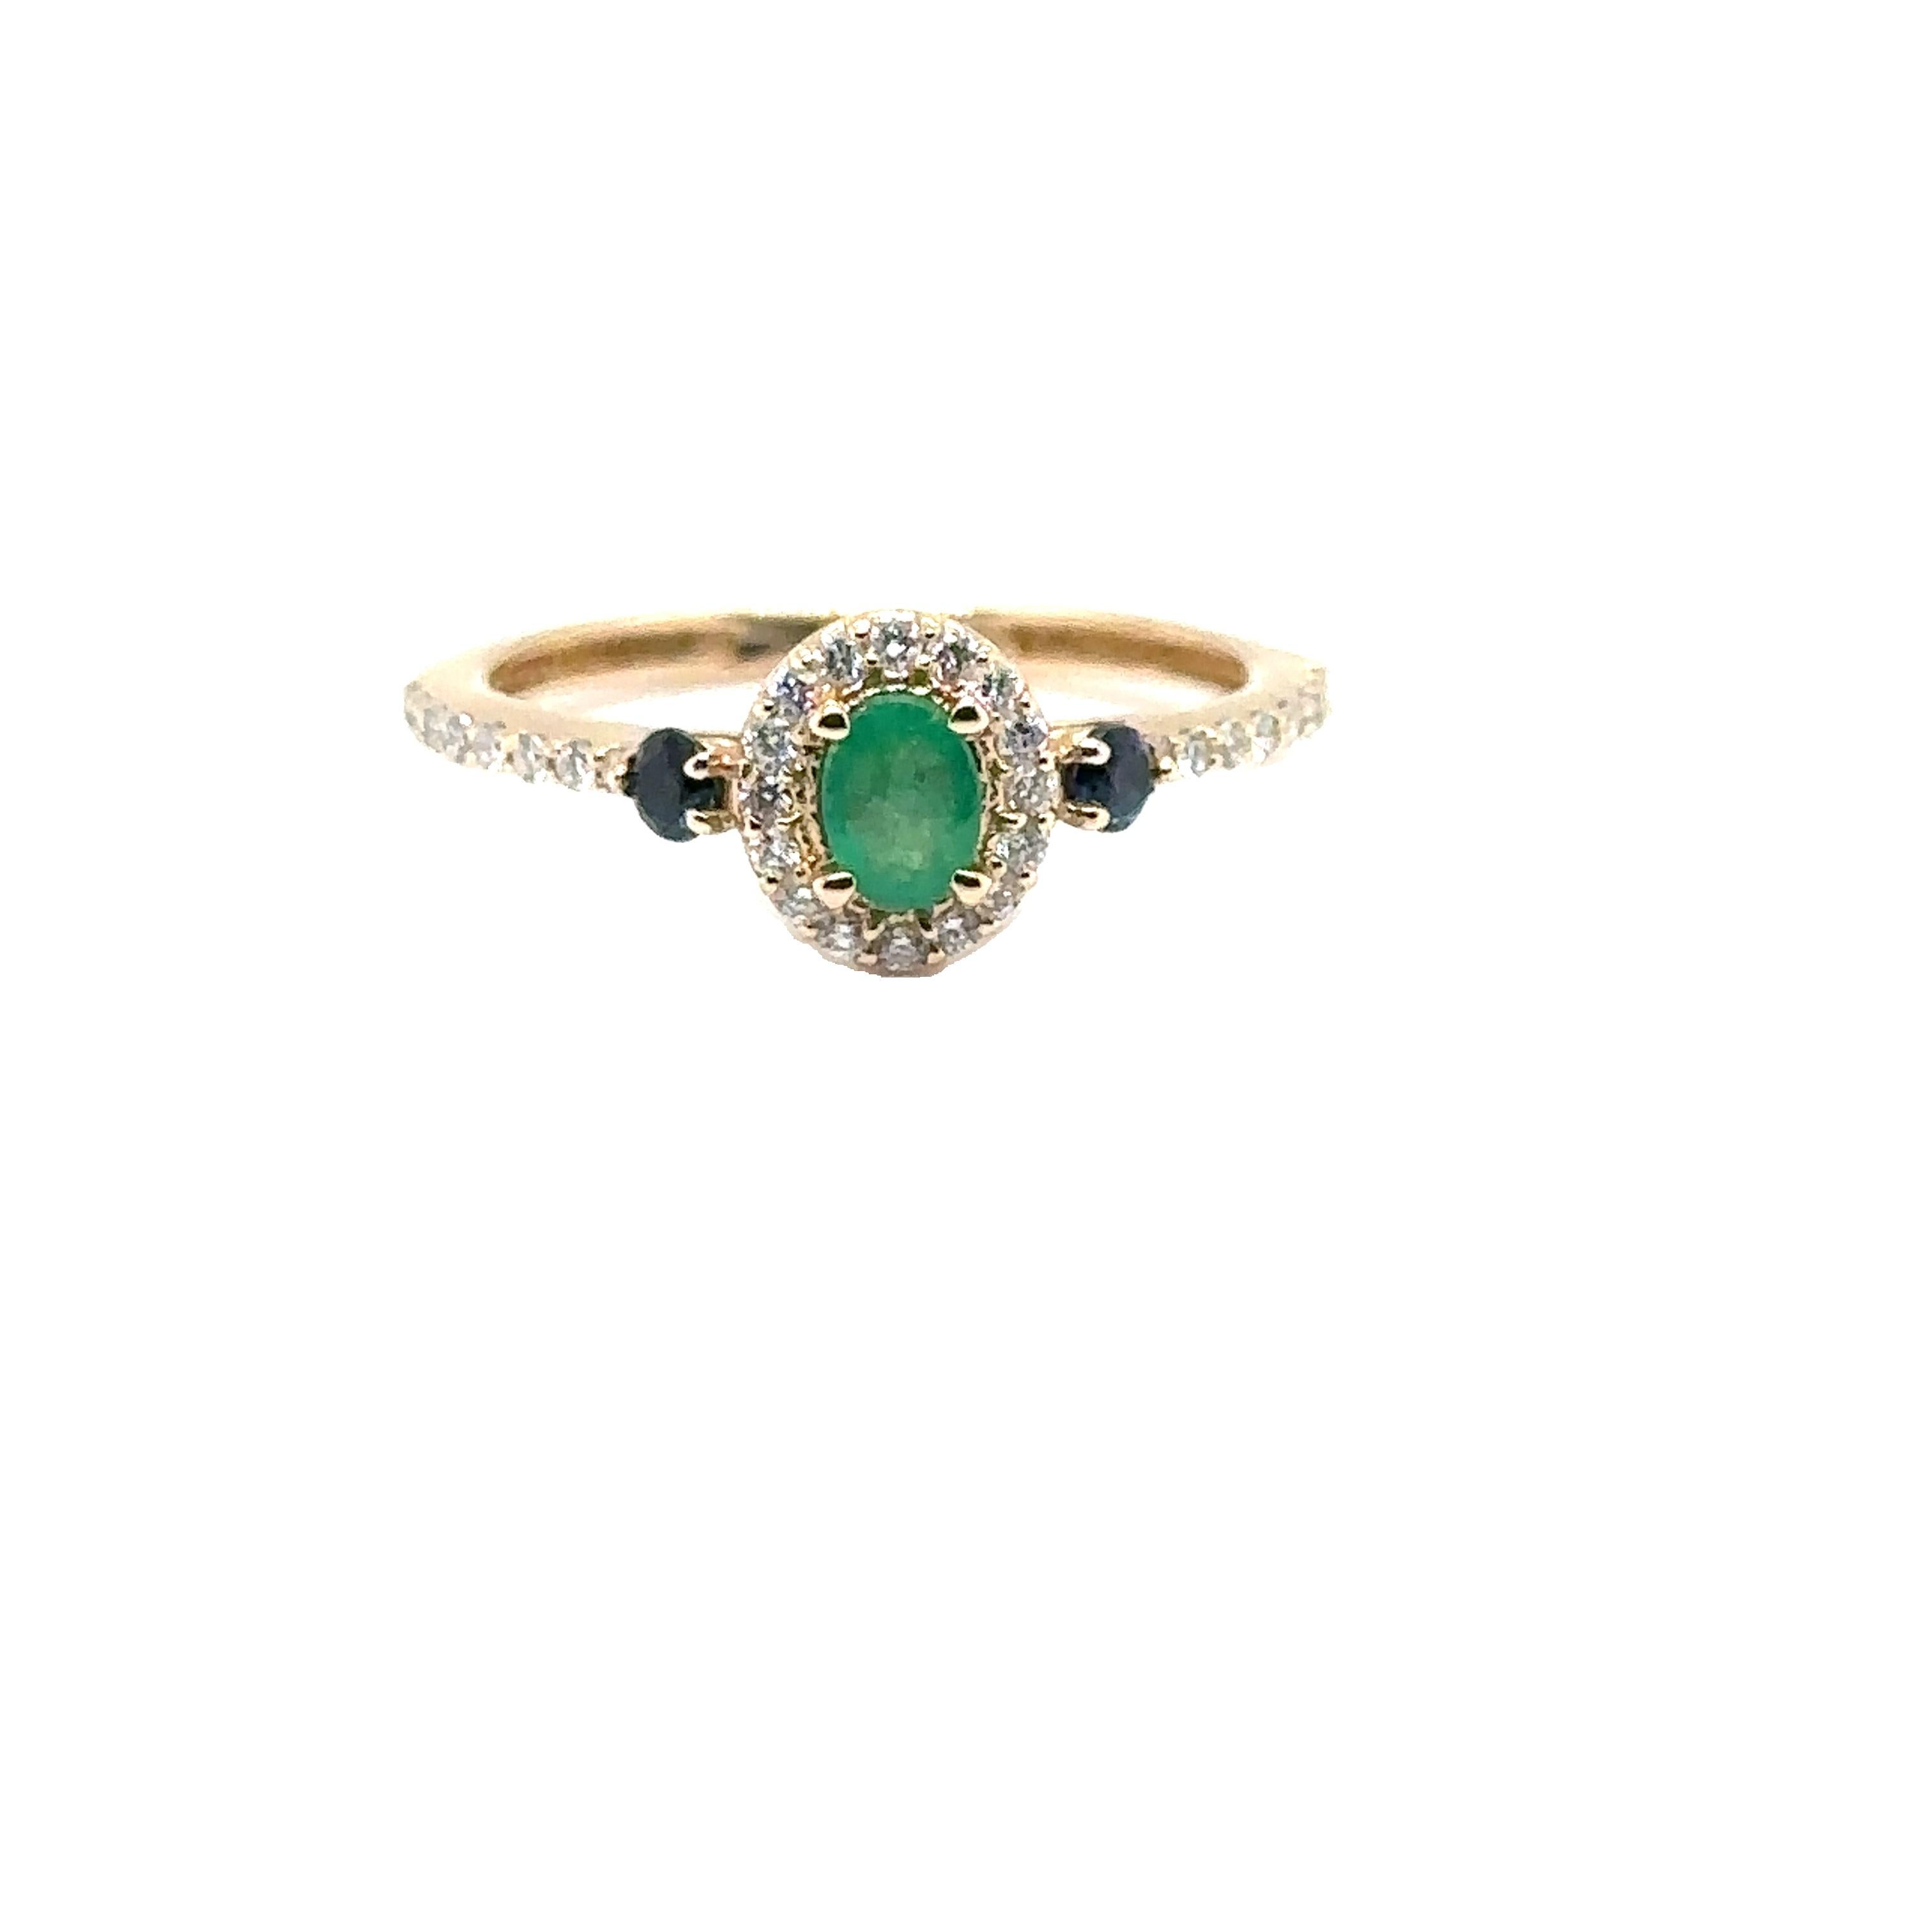 JAS-20-2134 - 14K YELLOW GOLD EMERALD RING with SAPPHIRES & DIAMONDS  In New Condition For Sale In New York, NY